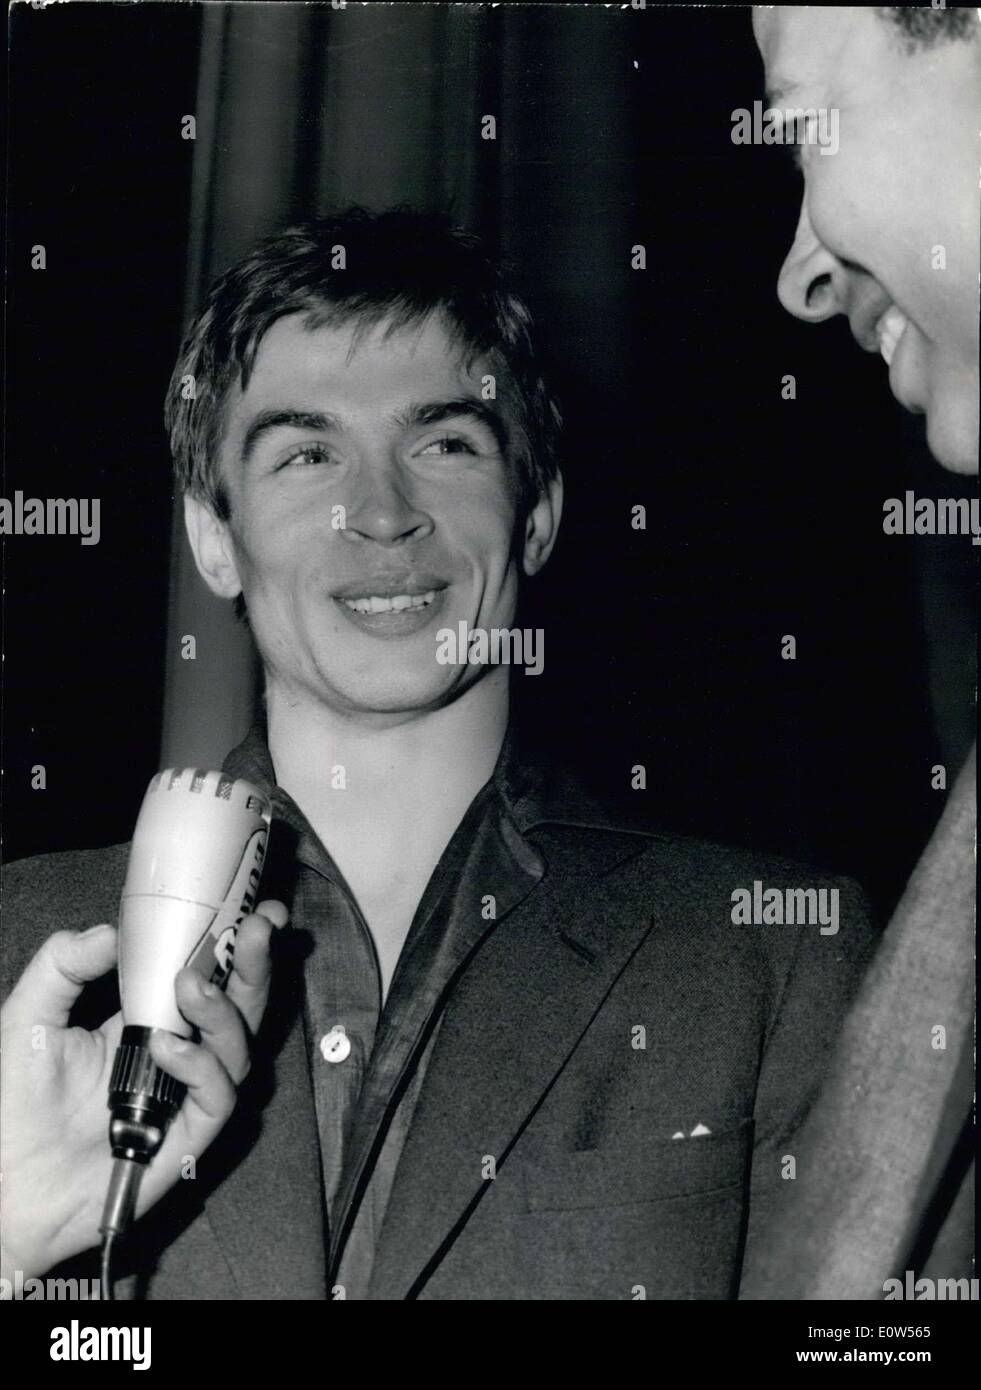 Jun. 22, 1961 - Soviet dancer who chose freedom to star in Marquis De Cuevas Ballet: Rudolf Nureyev, the star dancer of the Leningard Kirov ballet who chose freedom, will appear in ''Sleeping Beauty'' as a star dancer of the Marques De Cuevas ballet at the champs Elysees Theater tomorrow. Close up of Nureyev smiling as he was interviewed at the champs Elysees theater this afternoon. Stock Photo